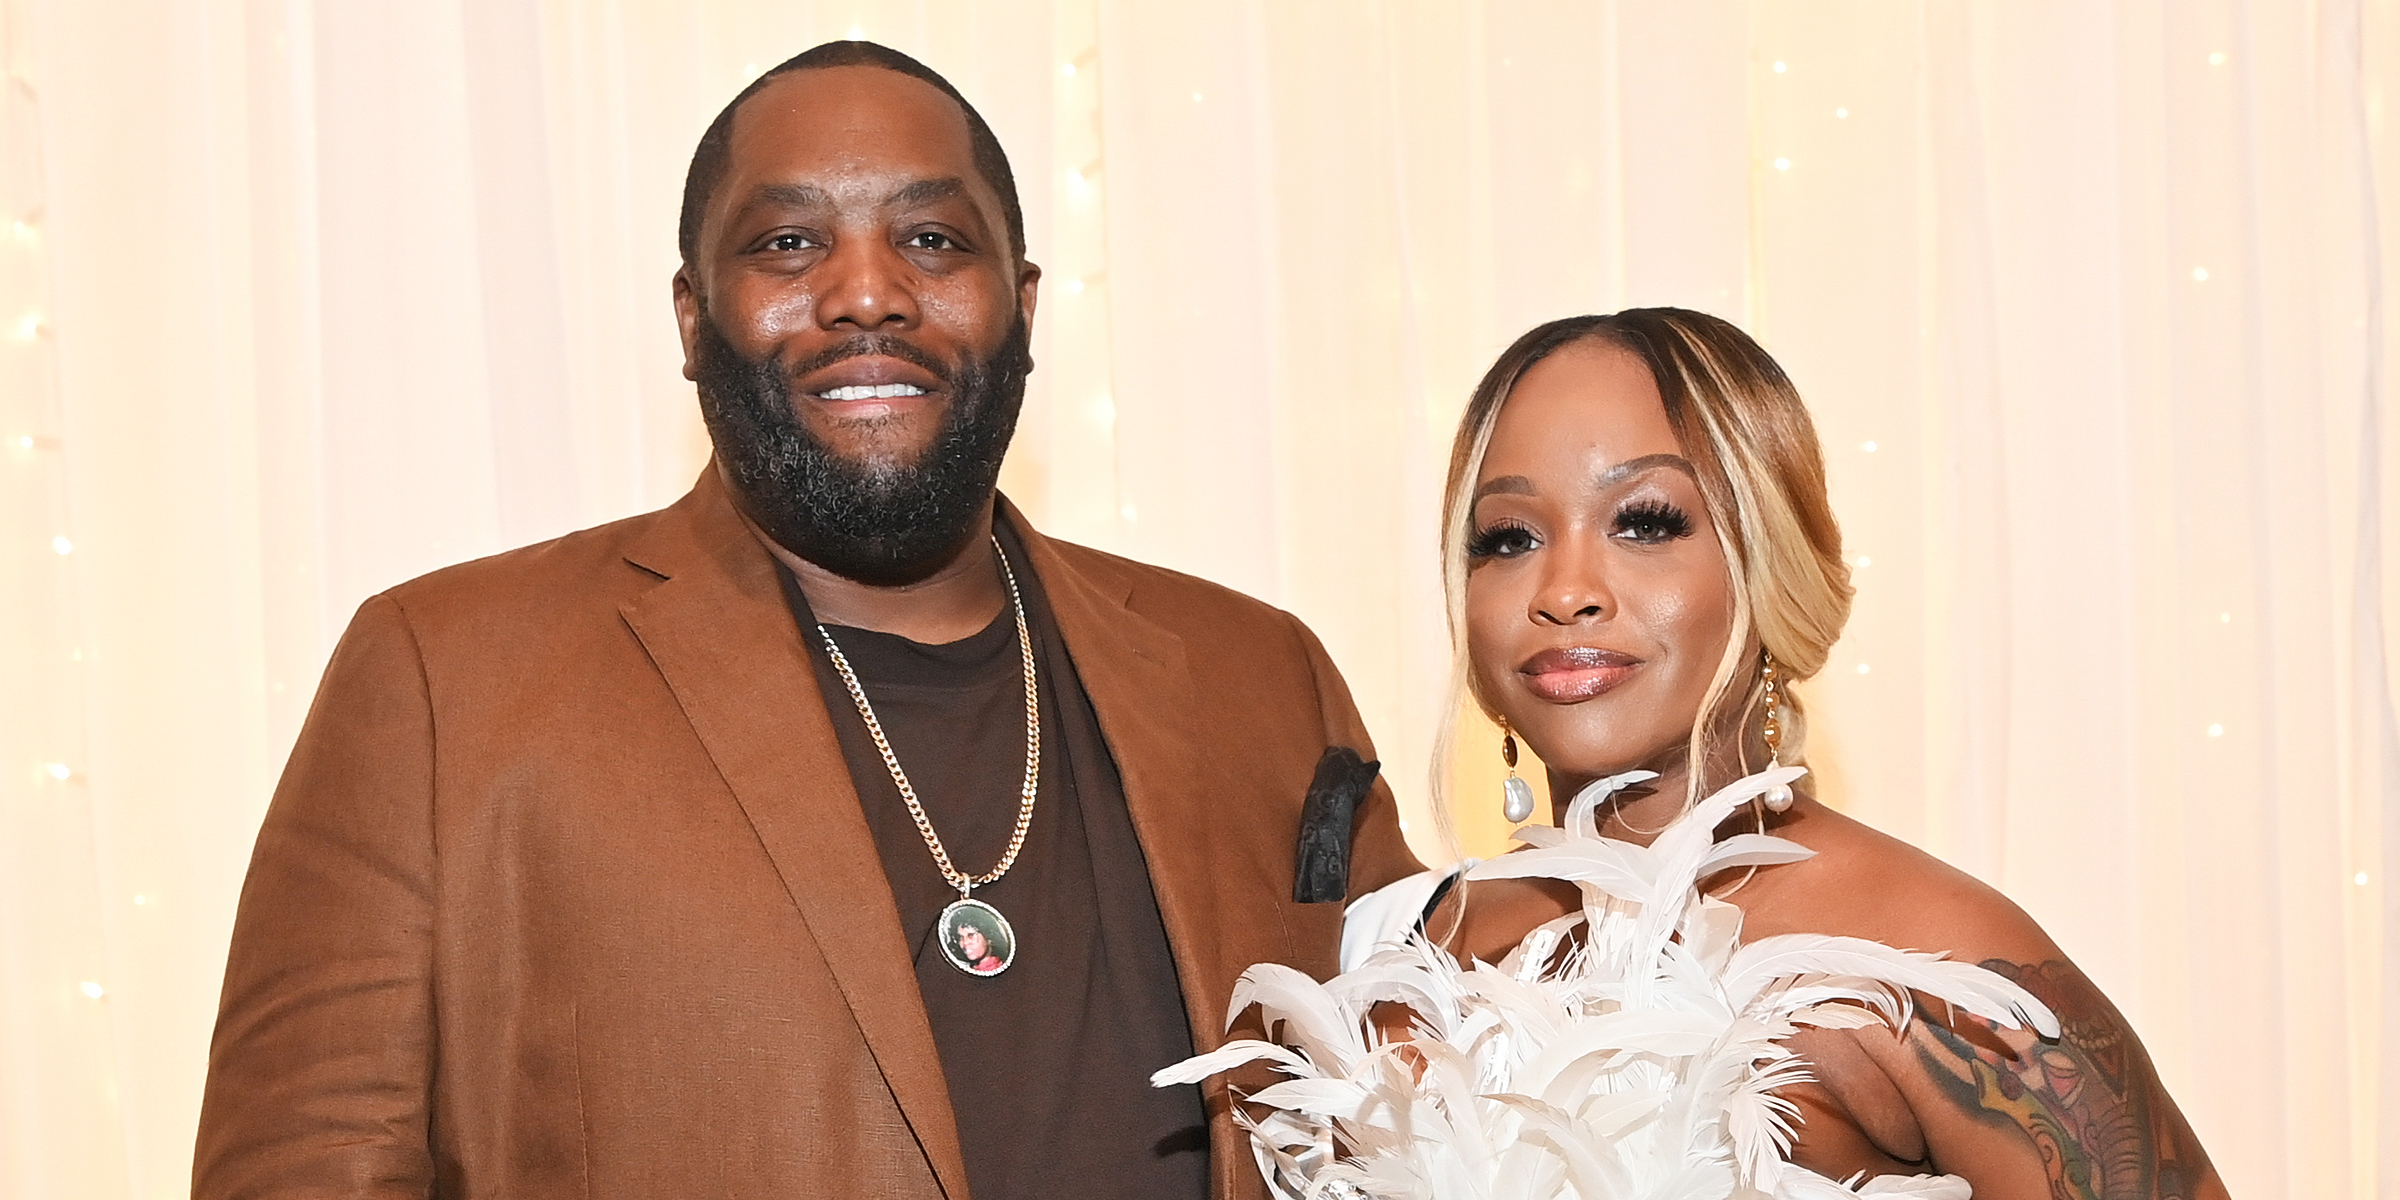 Killer Mike and Shana Render | Source: Getty Images